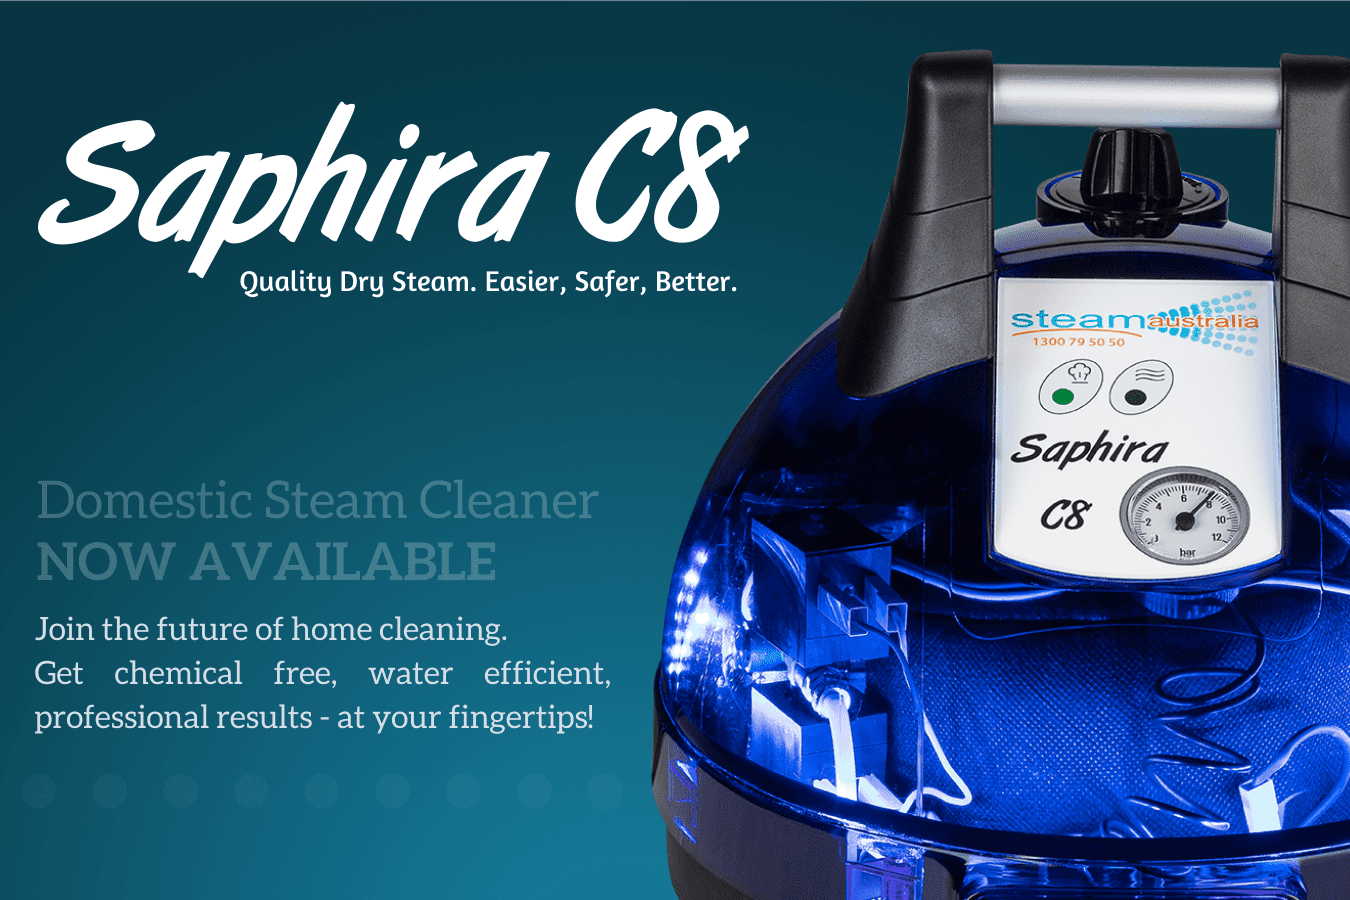 Saphira C8. The Best Domestic Steam Cleaner For Your Home